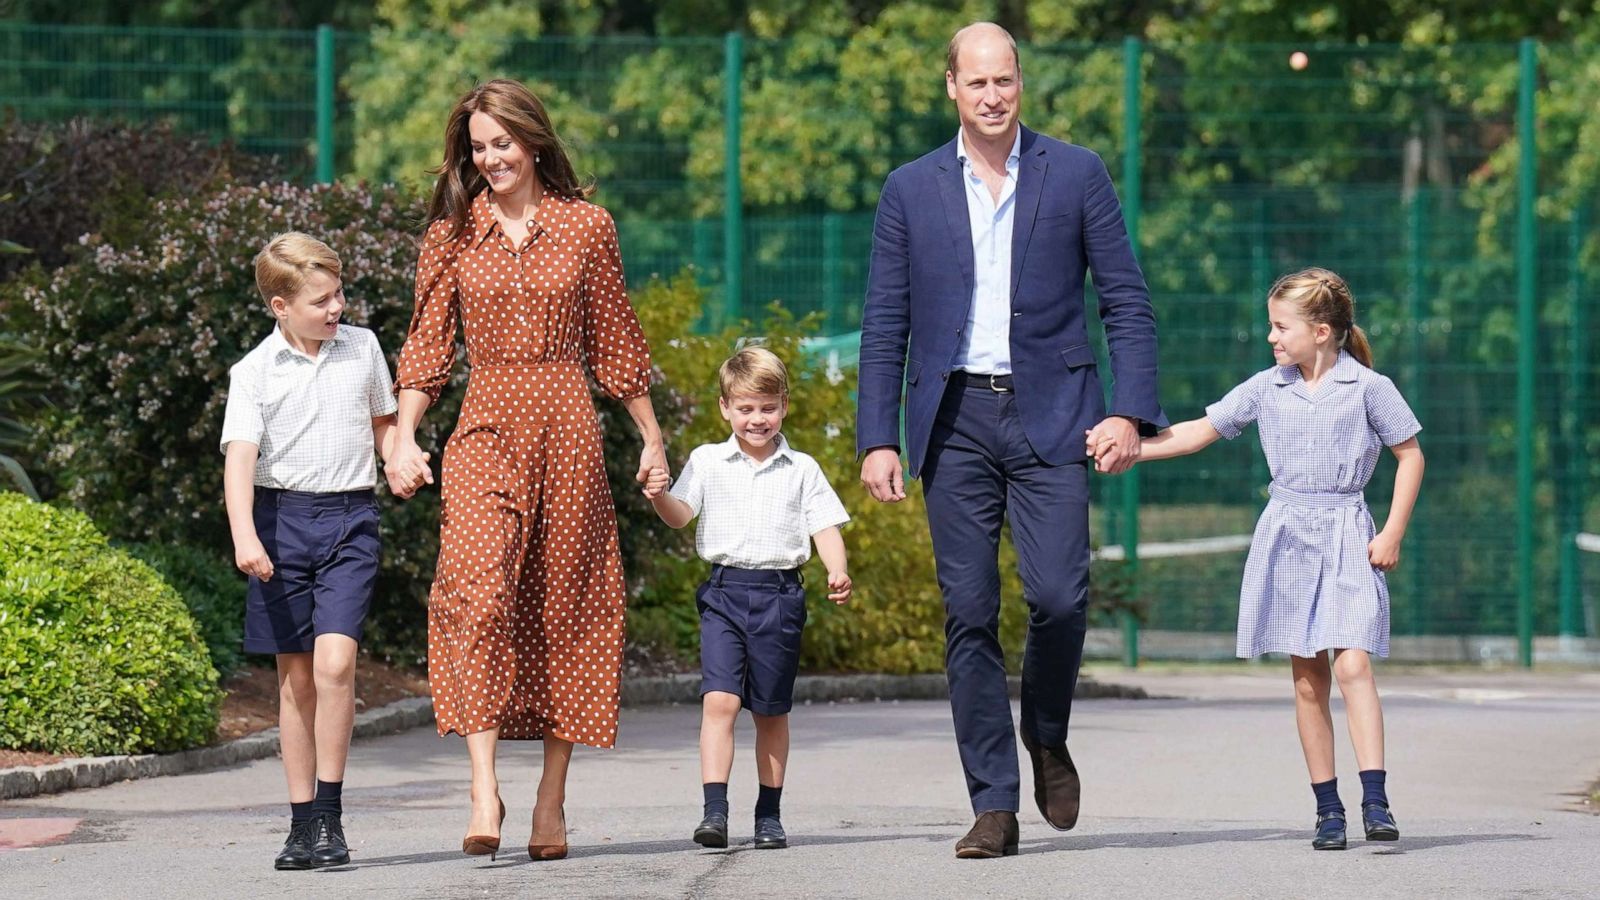 PHOTO: Prince George, Princess Charlotte and Prince Louis accompanied by their parents, Prince William, Duke of Cambridge and Catherine, Duchess of Cambridge, arrive at Lambrook School, Sept. 7, 2022, in Bracknell, England.